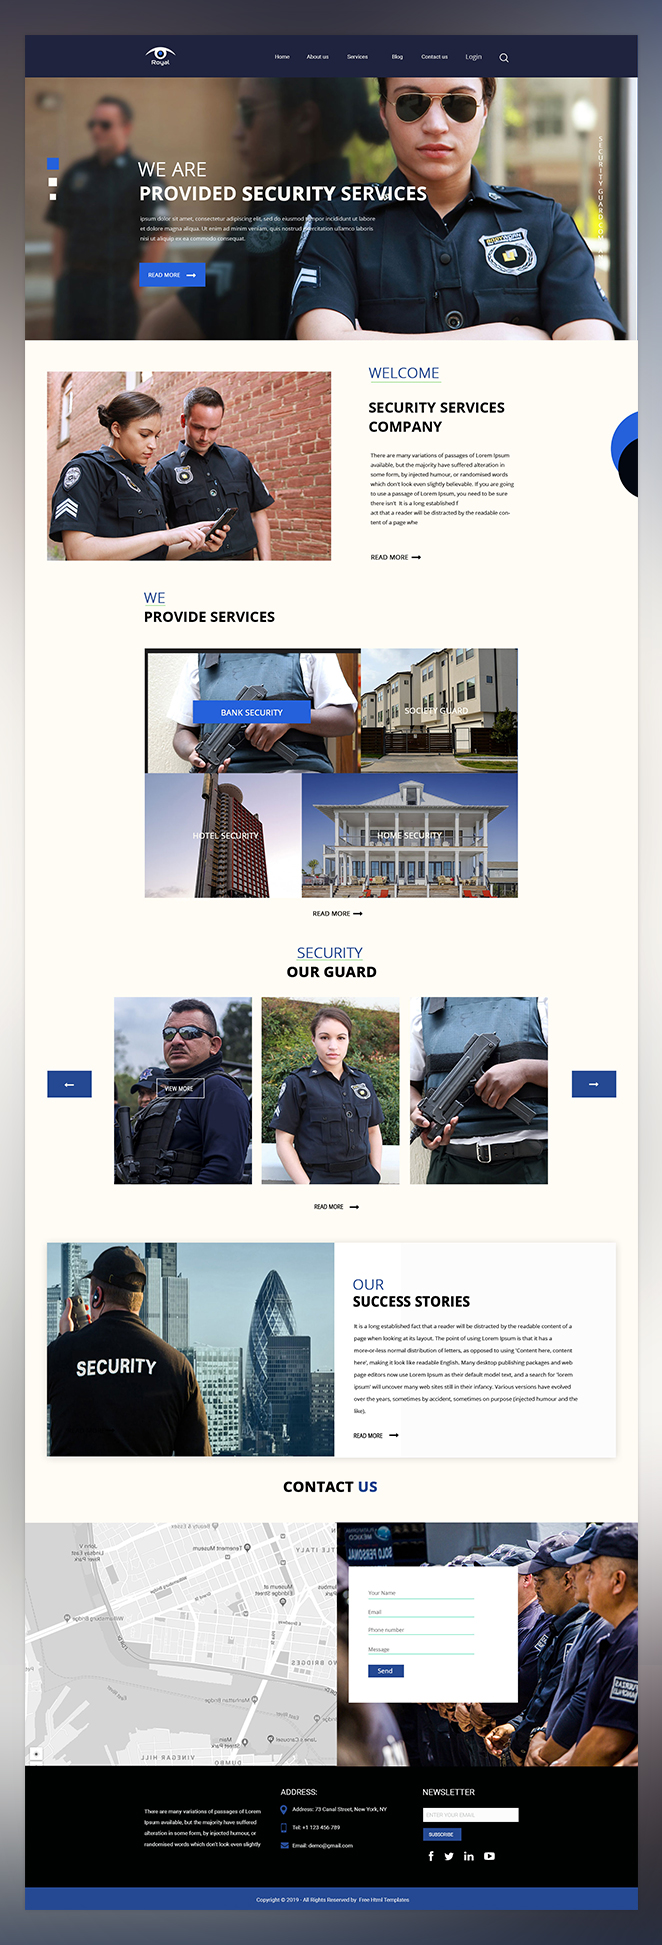 Royal security services psd template